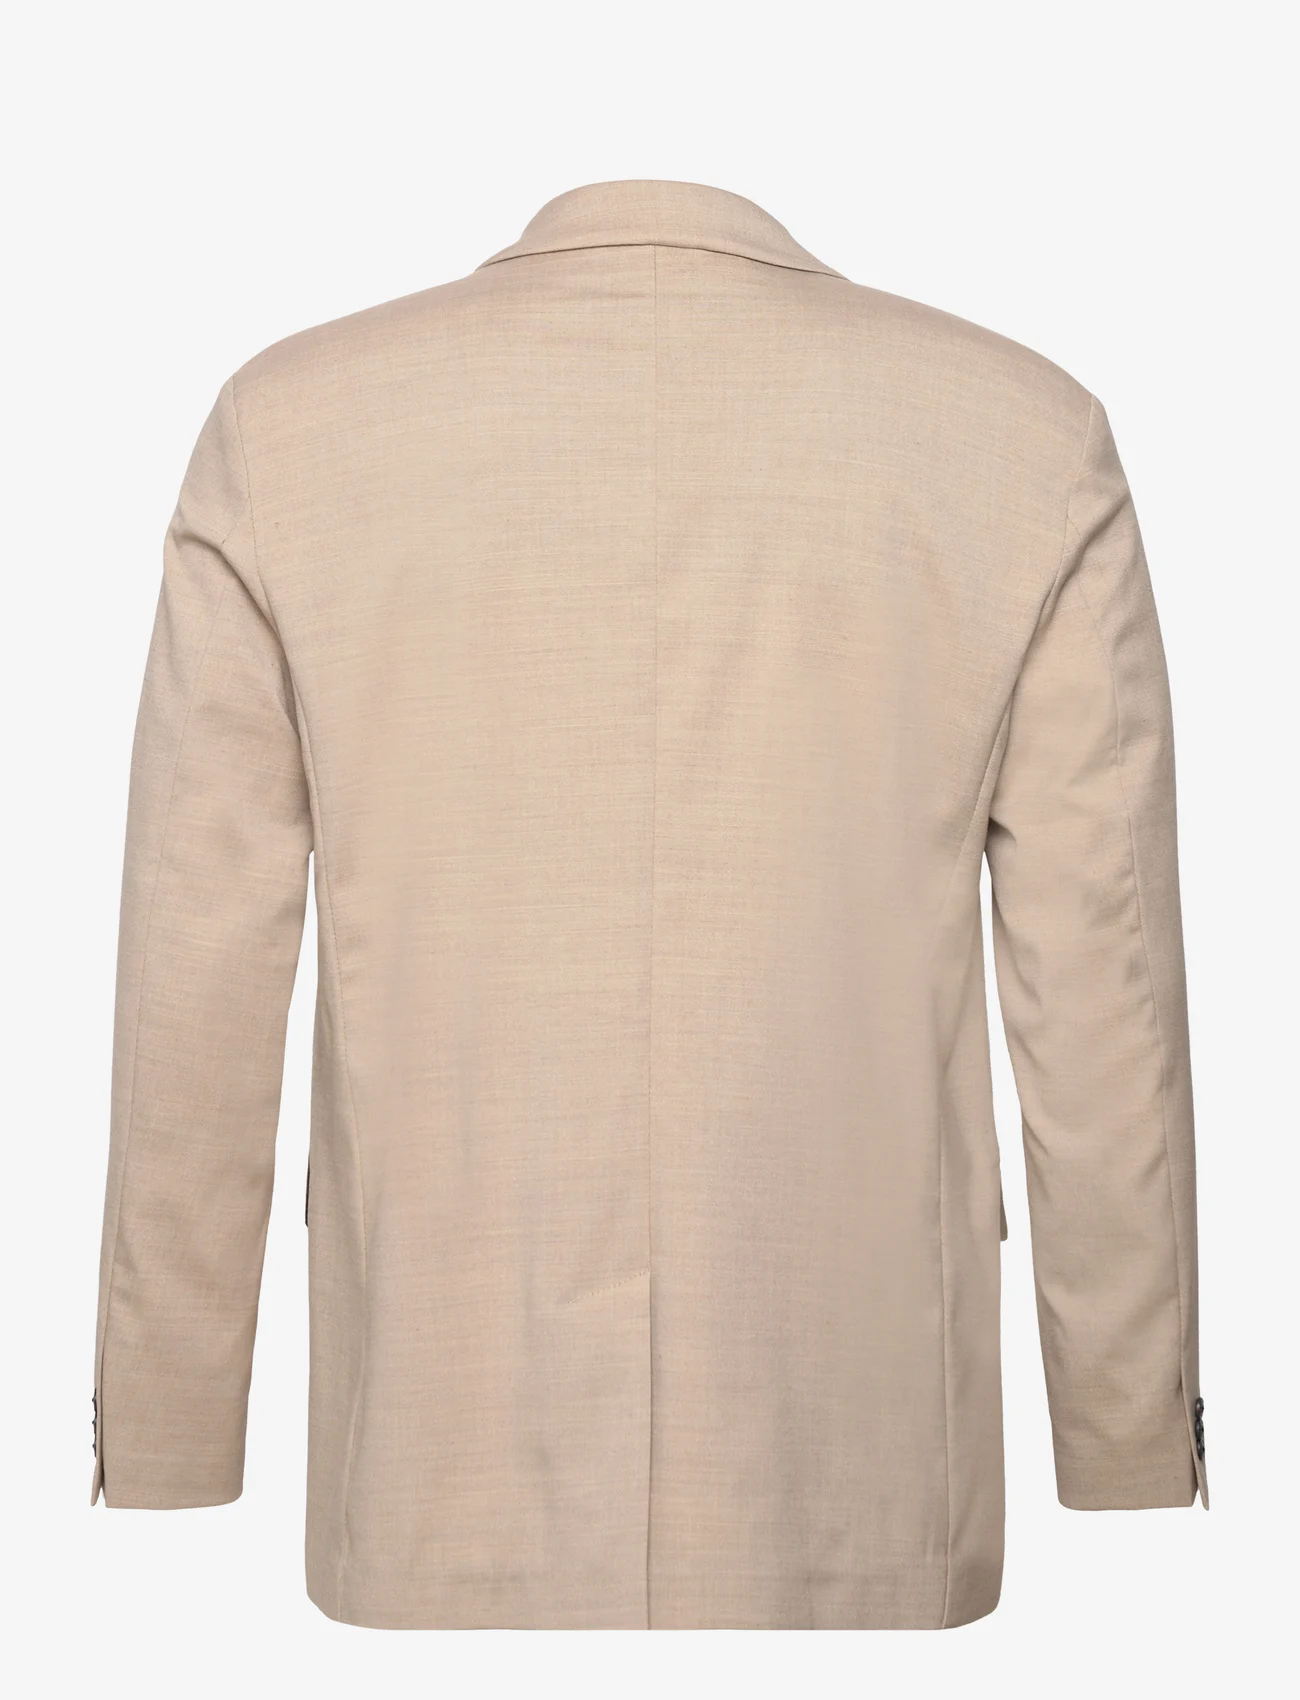 Matinique - MAwalker Double Heritage - dobbeltradede blazere - simply taupe - 1